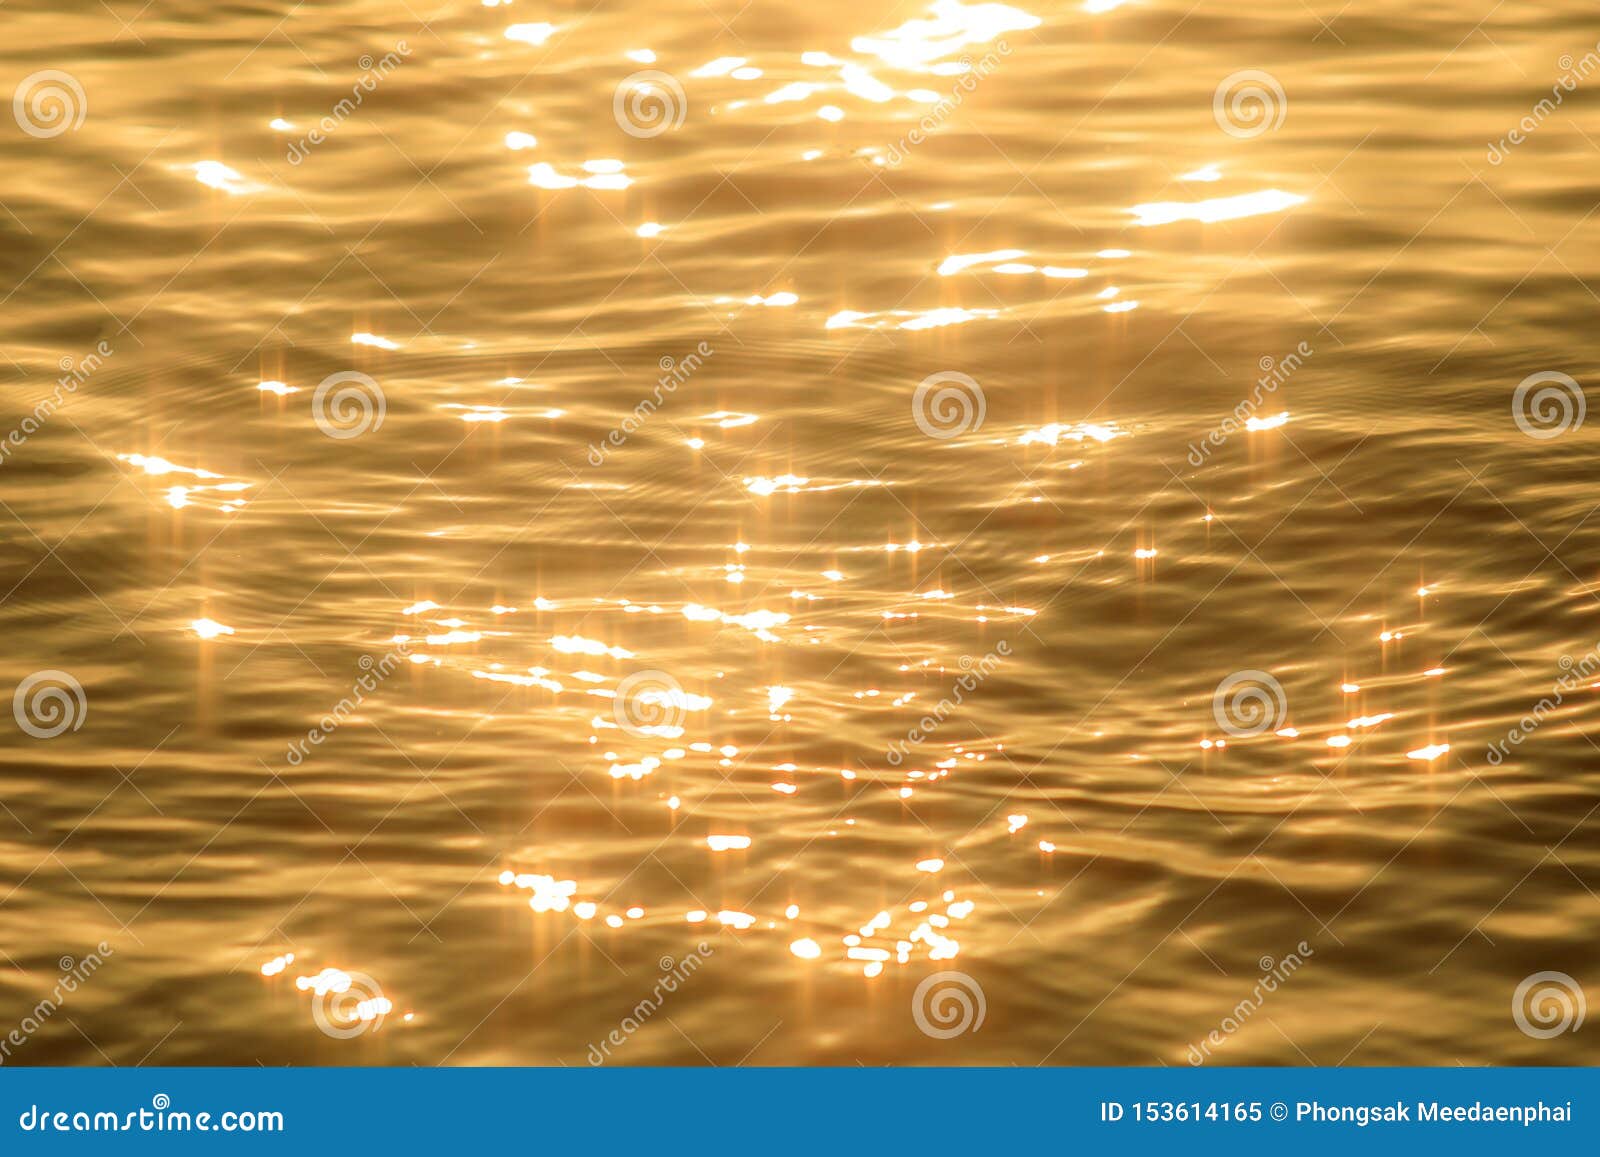 abstract photo of surface water of sea or ocean at sunset time with golden light tone.